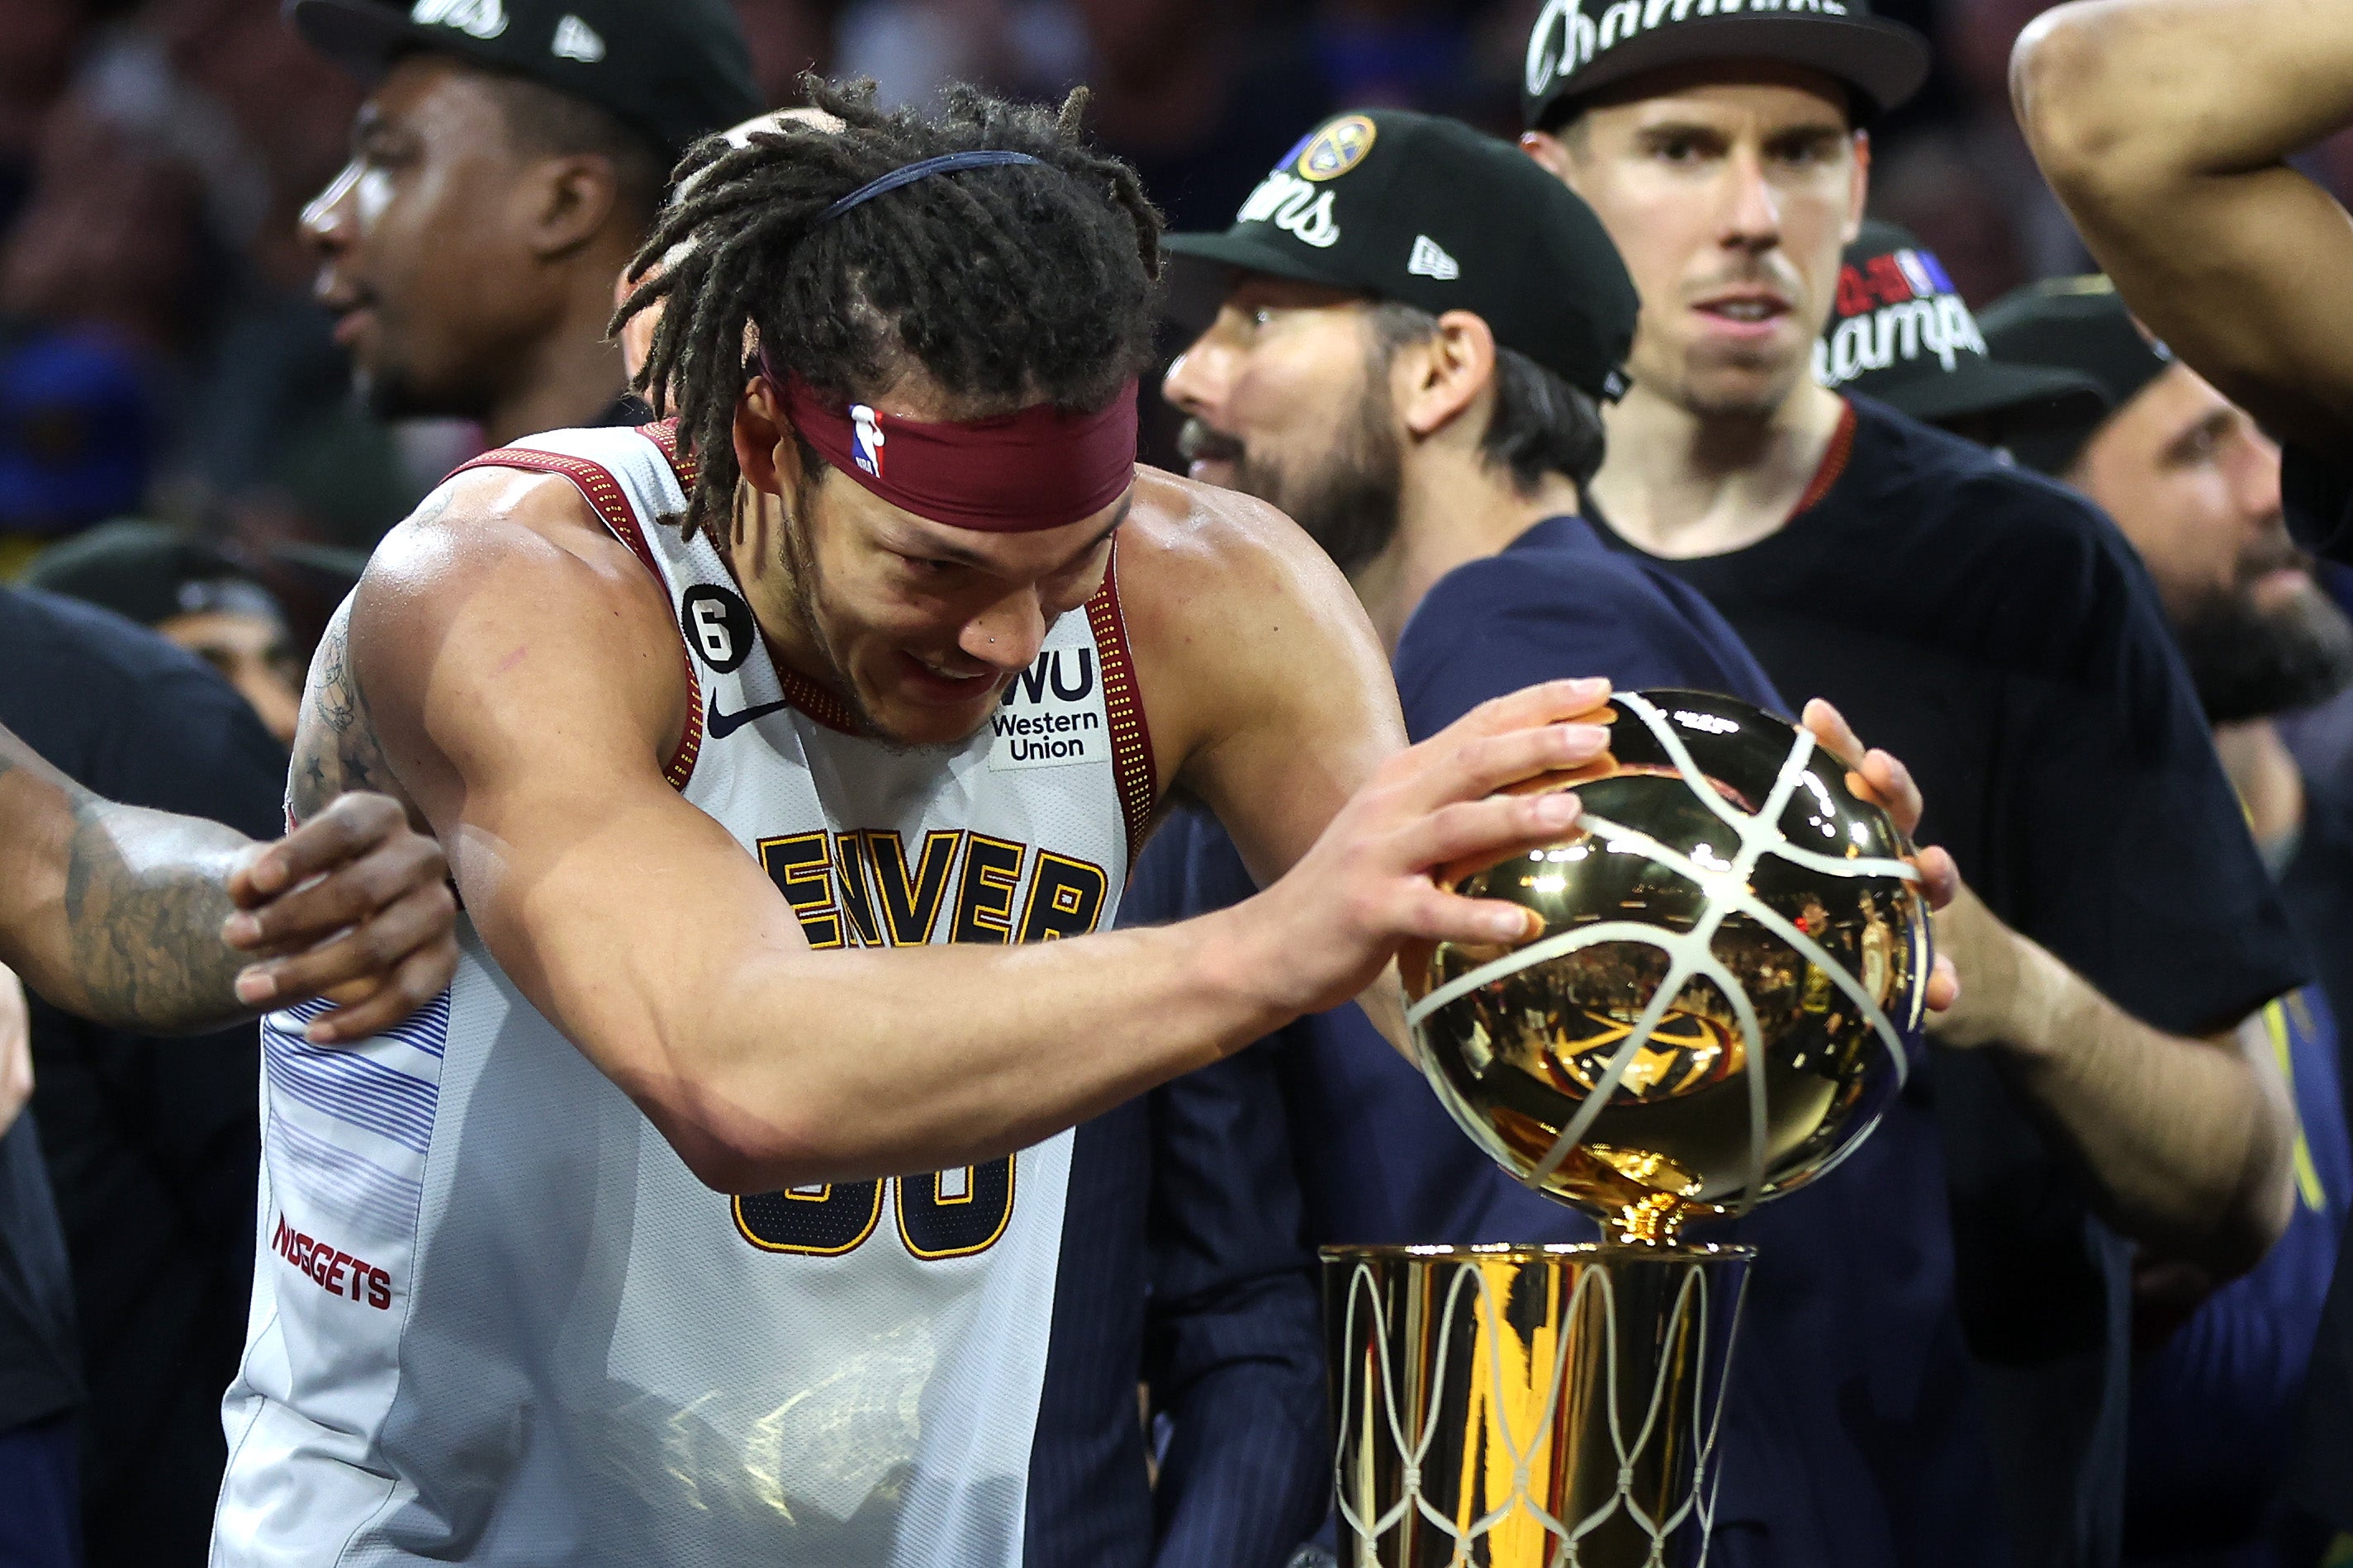 The Denver Nuggets have won the NBA Finals for the first time in